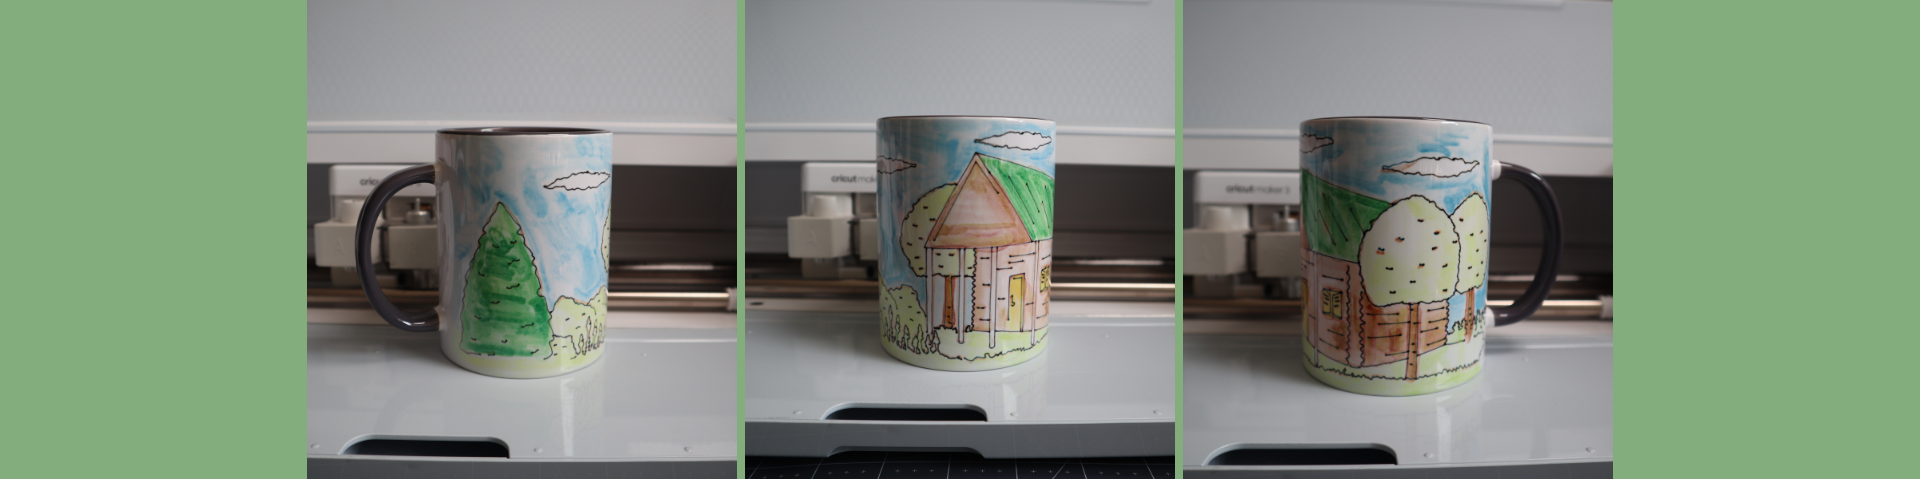 How to Watercolor Paint with Infusible Ink Markers // Cricut Mug Press Tutorial